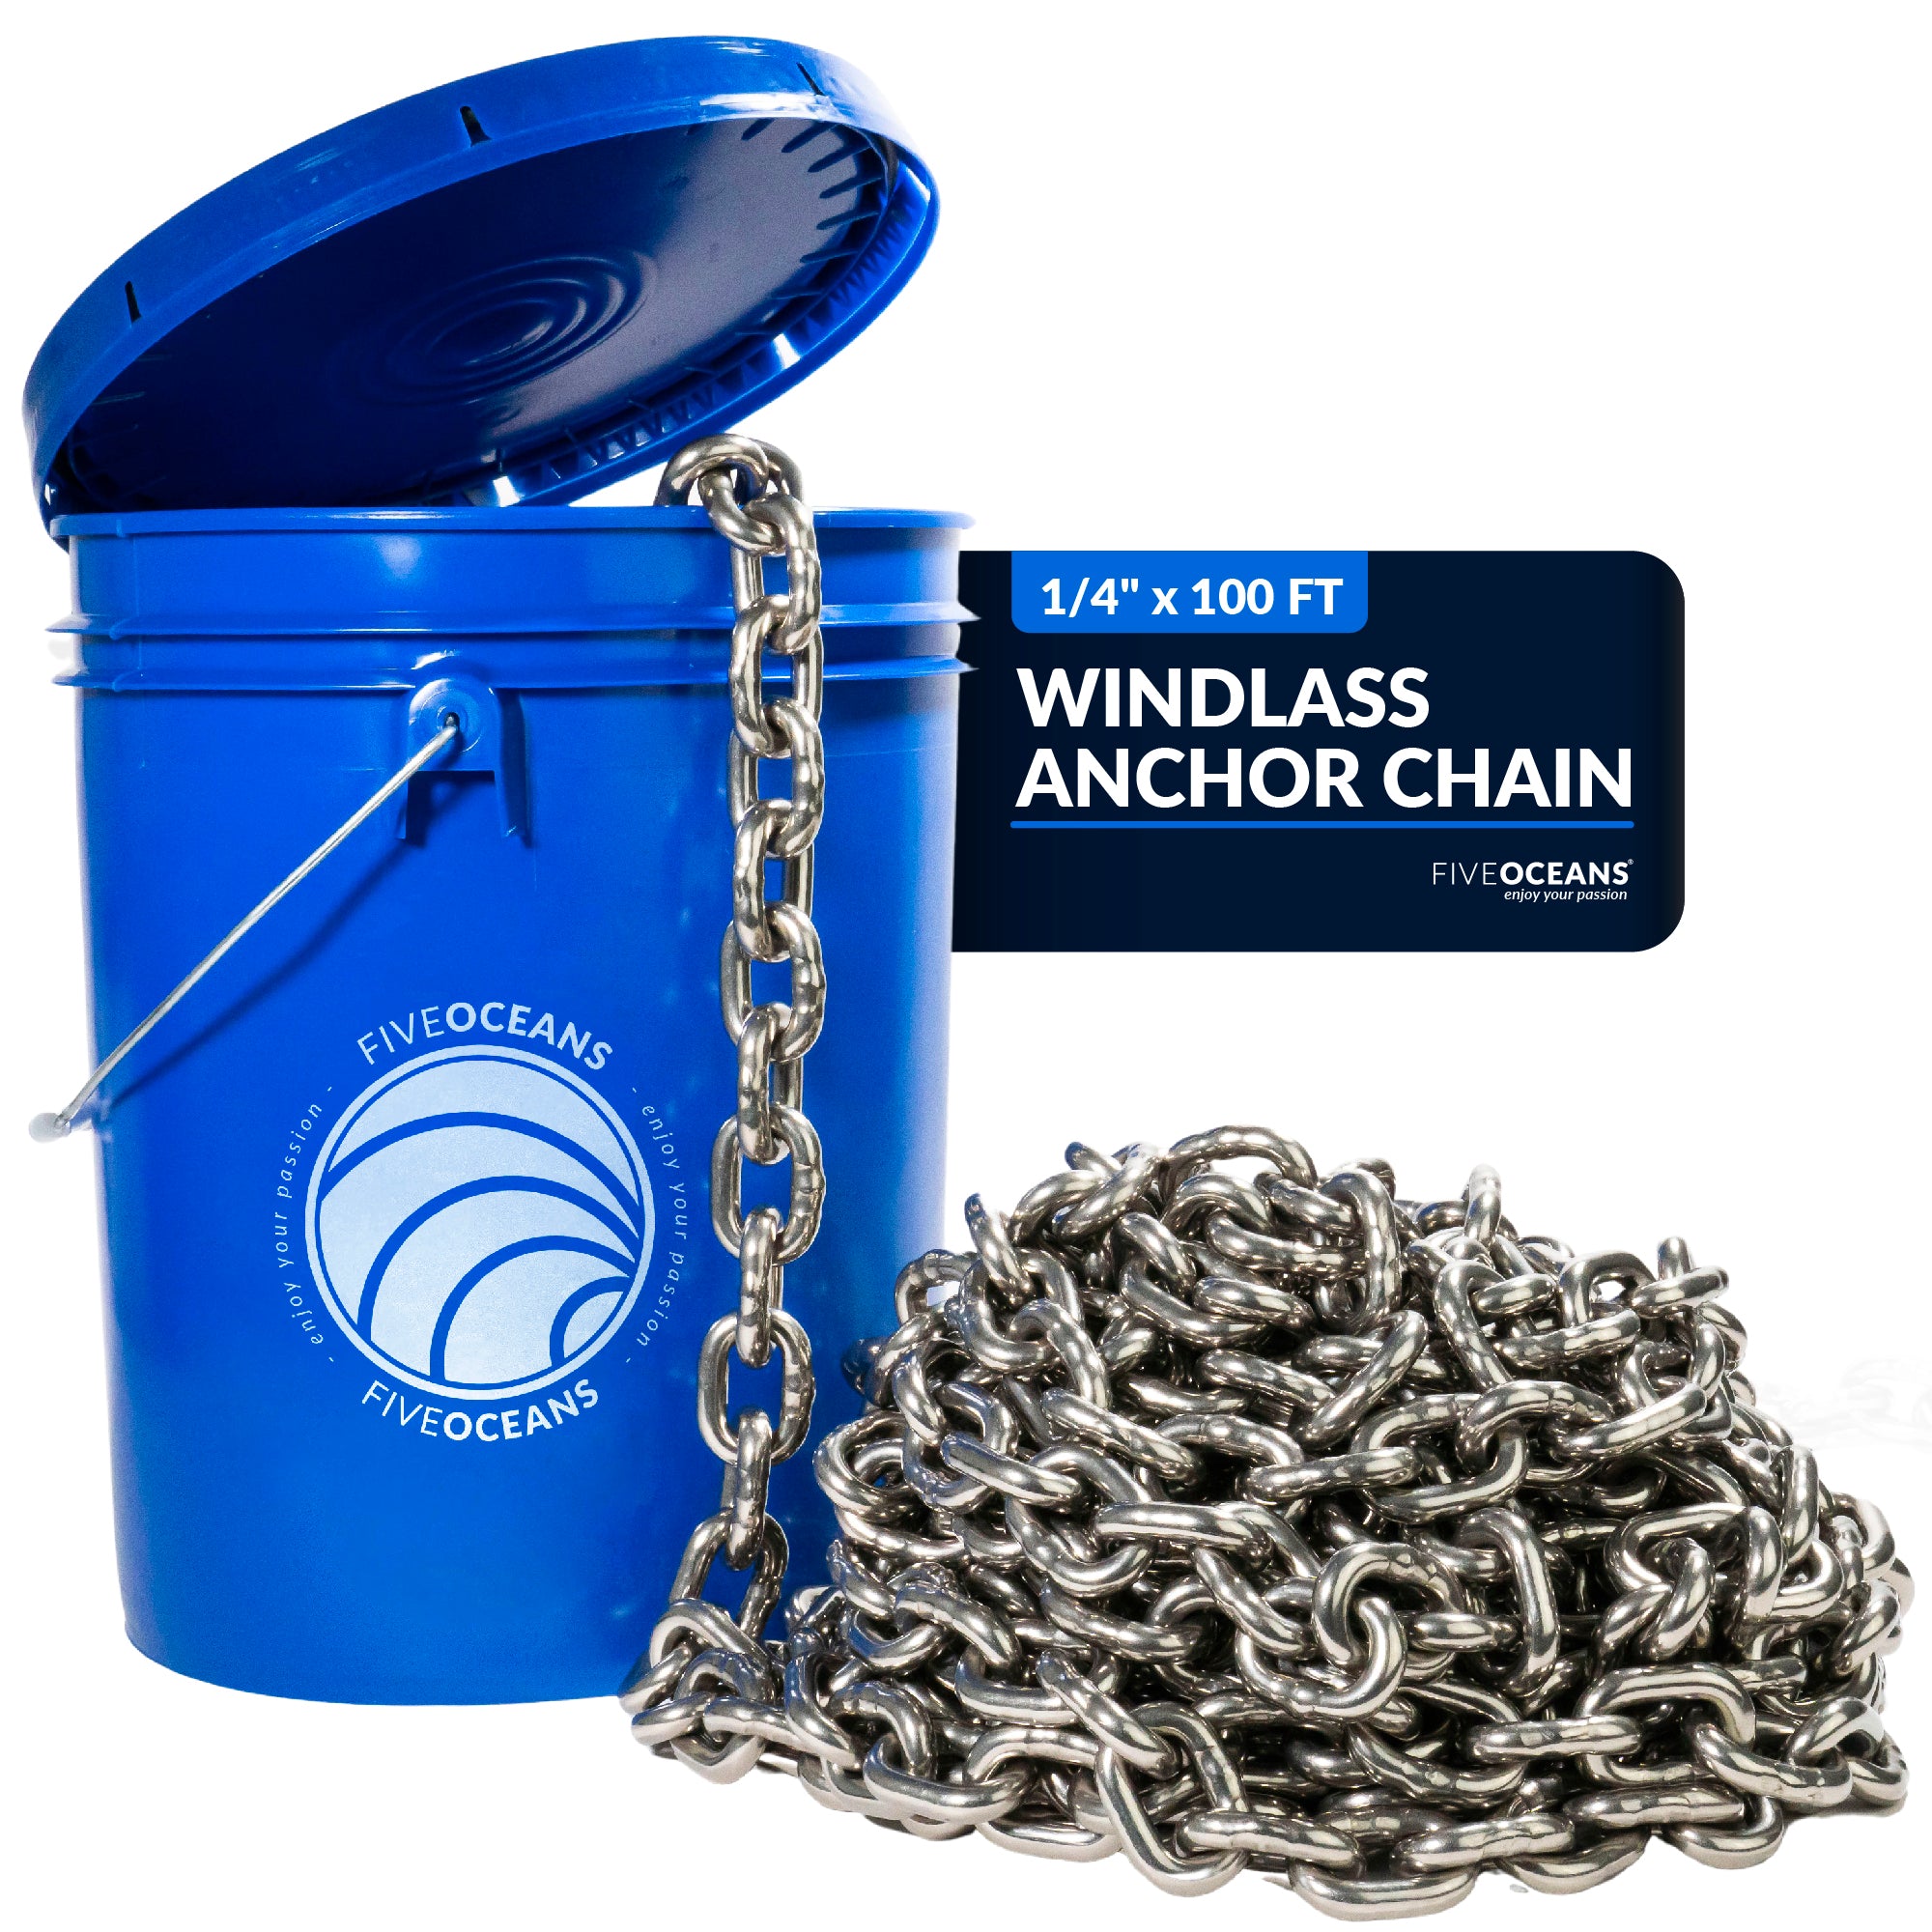 1/4" x 100' Boat Windlass Anchor Chain HT G4 Stainless Steel - FO4492-M100